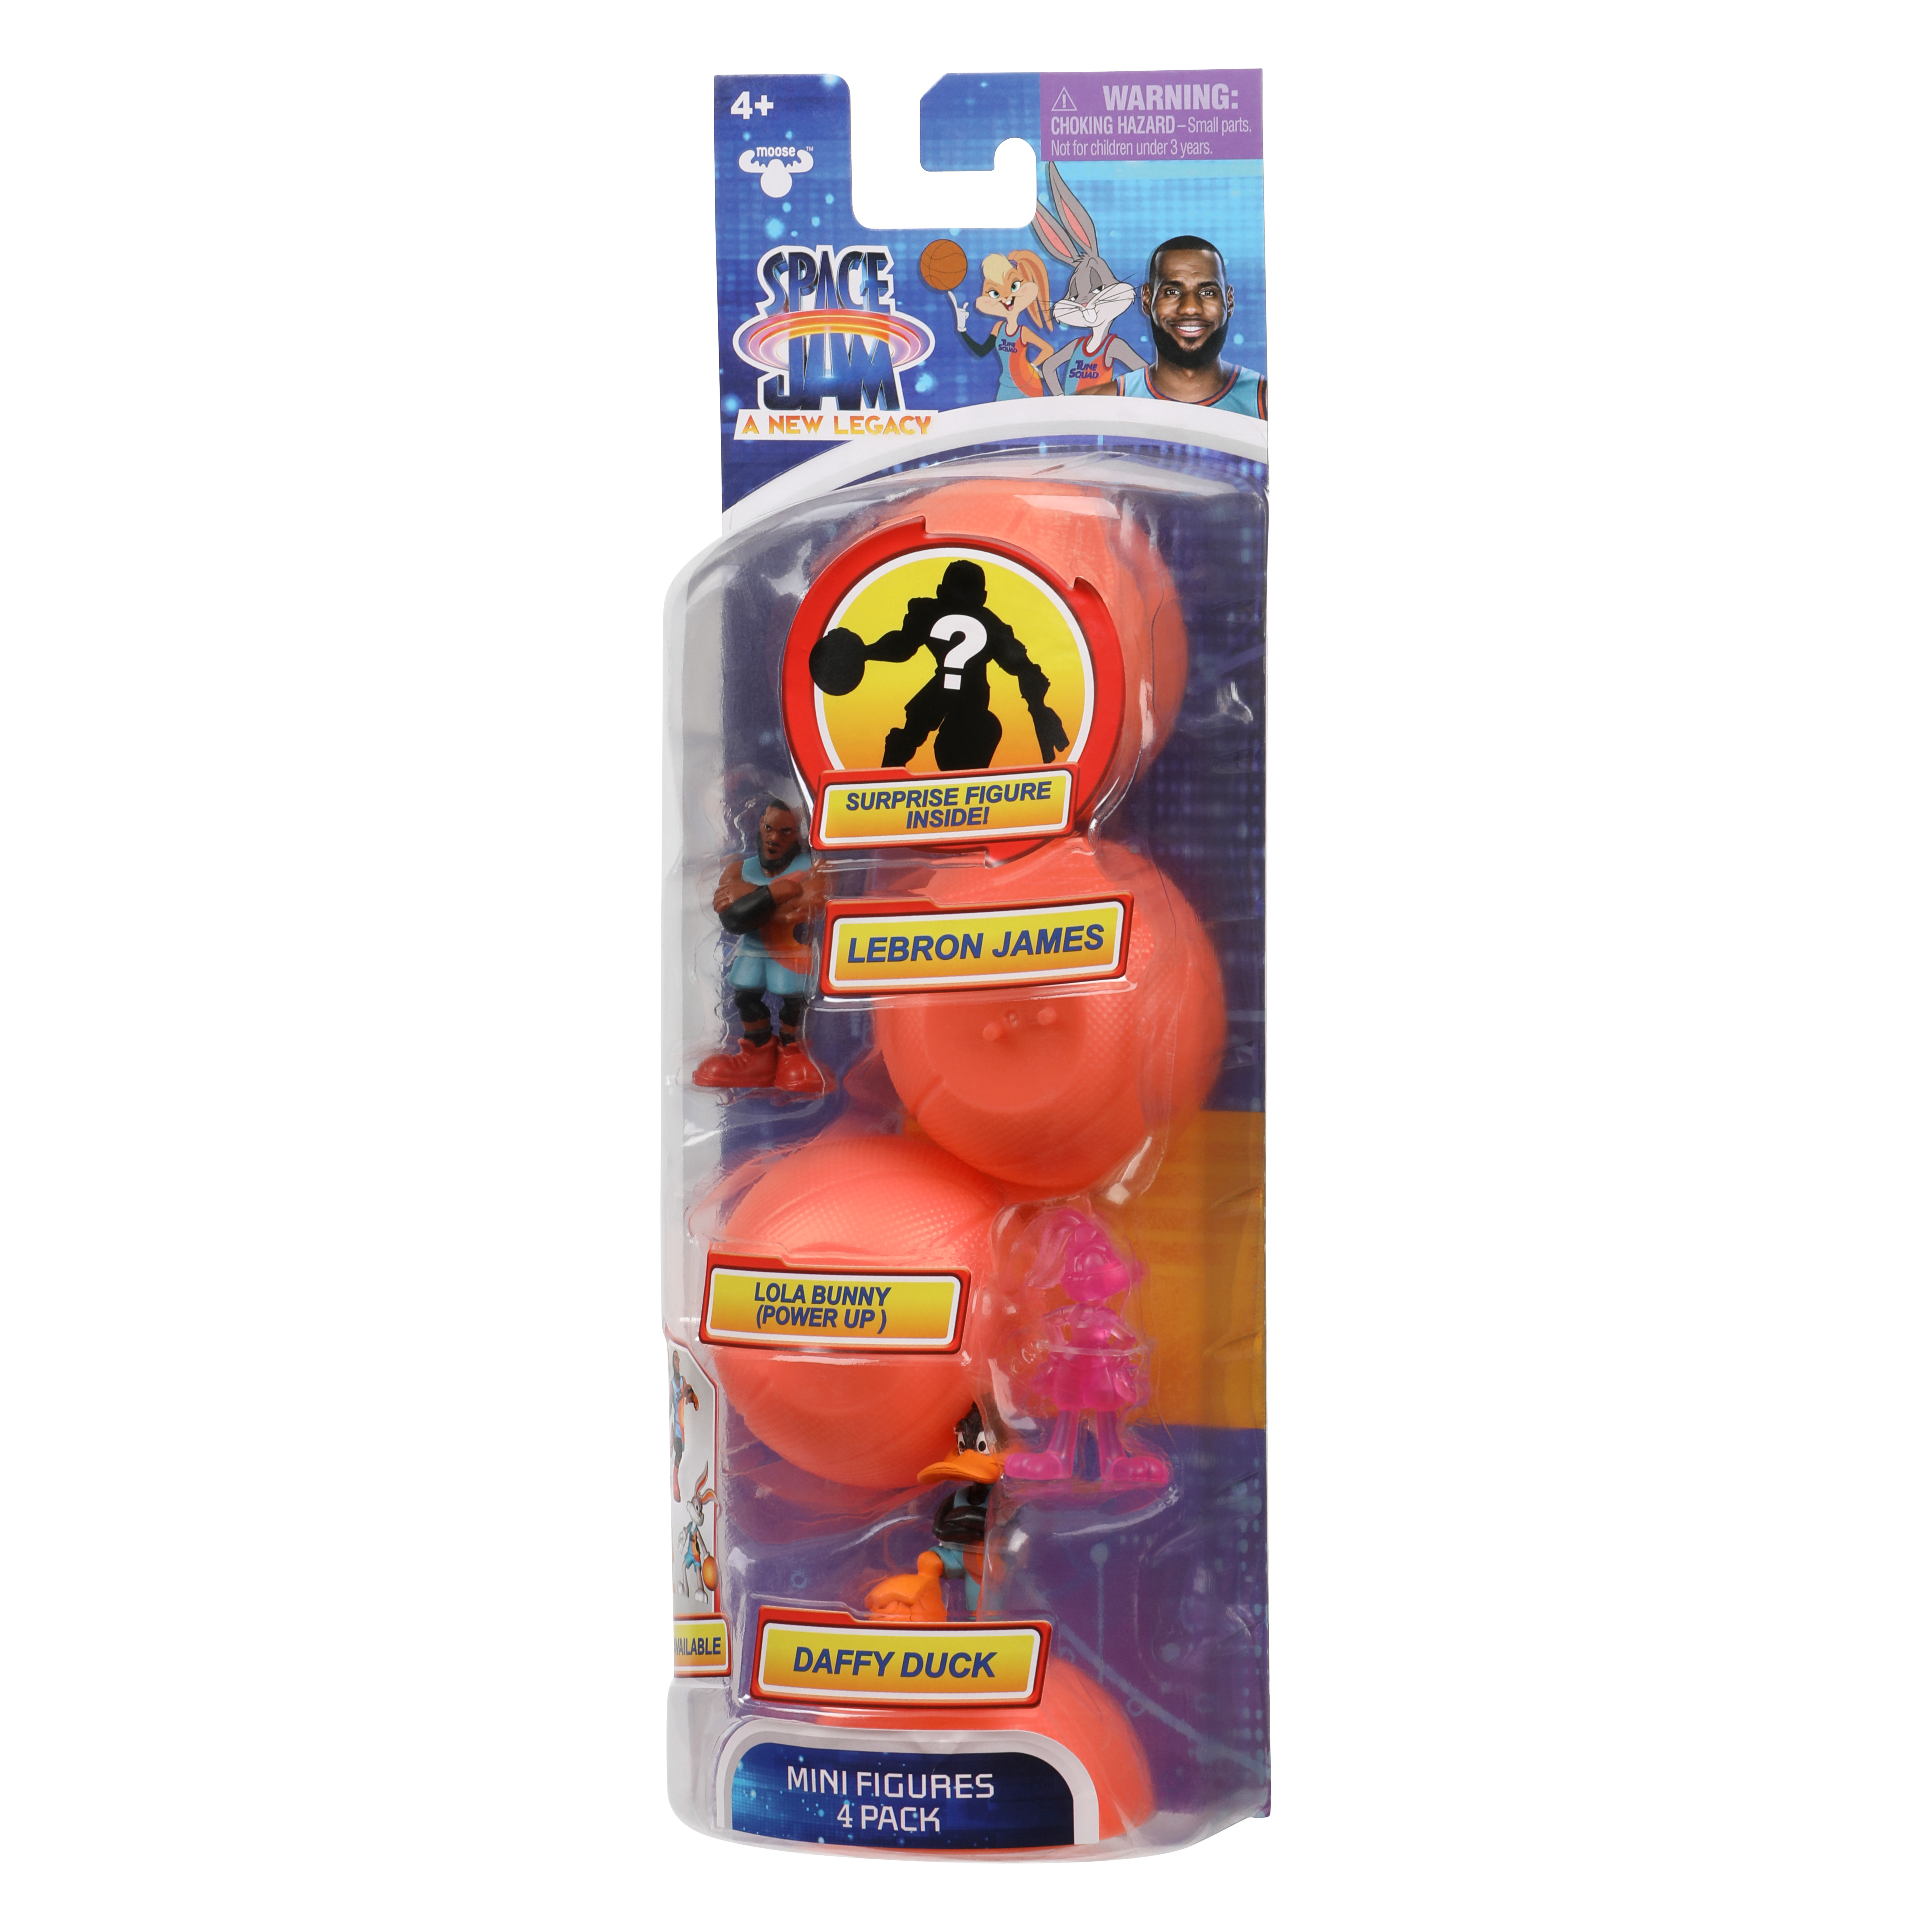 Space Jam: A New Legacy - 4 Pack - 2" LeBron James, Daffy Duck, Lola Bunny, & 1 Mystery Figures - Starting Line Up - image 2 of 11